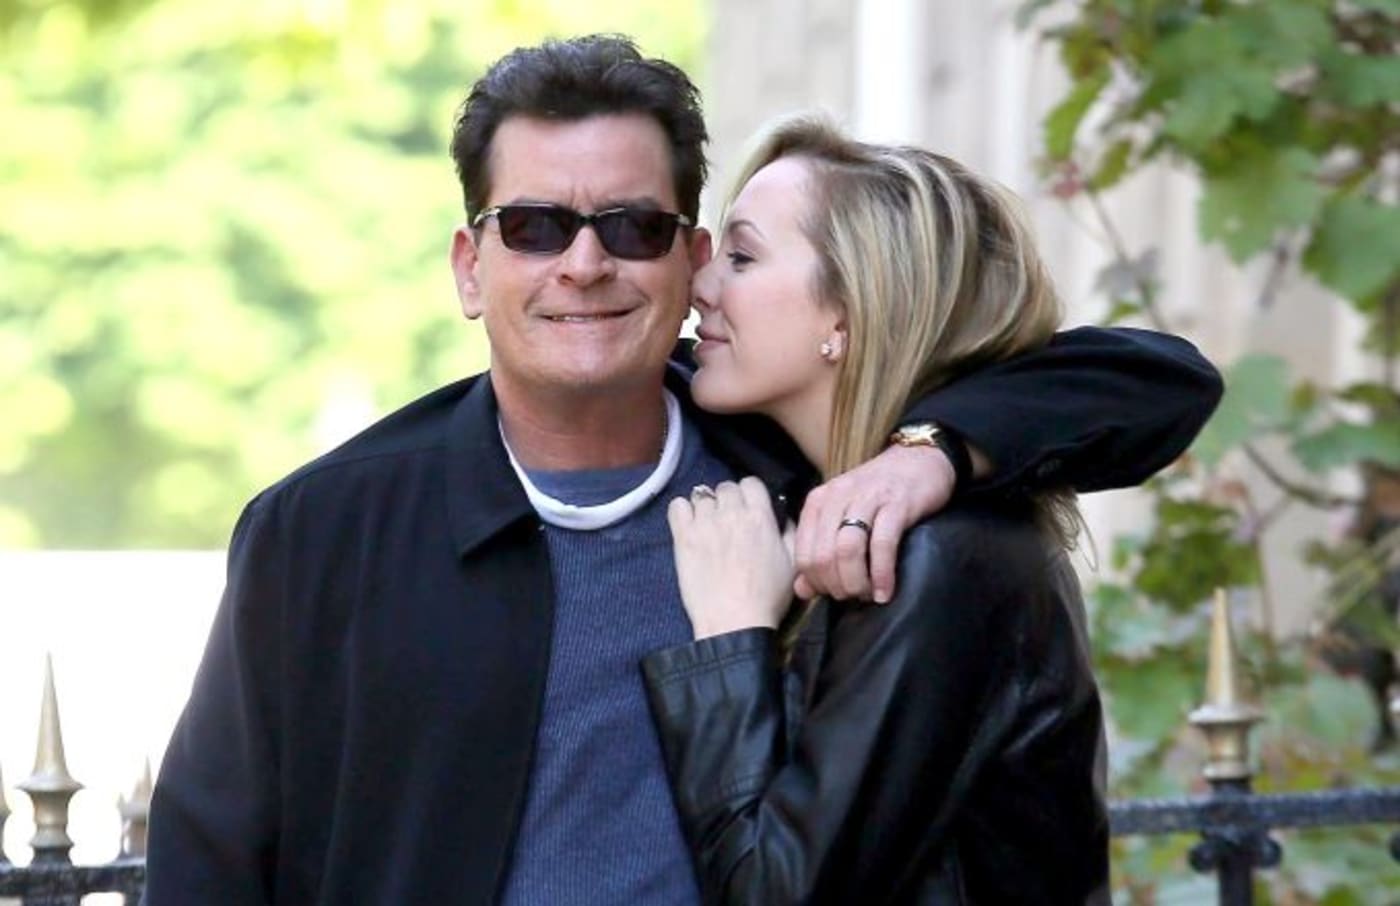 Charlie Sheen No Longer Marrying Adult Film Star Complex 